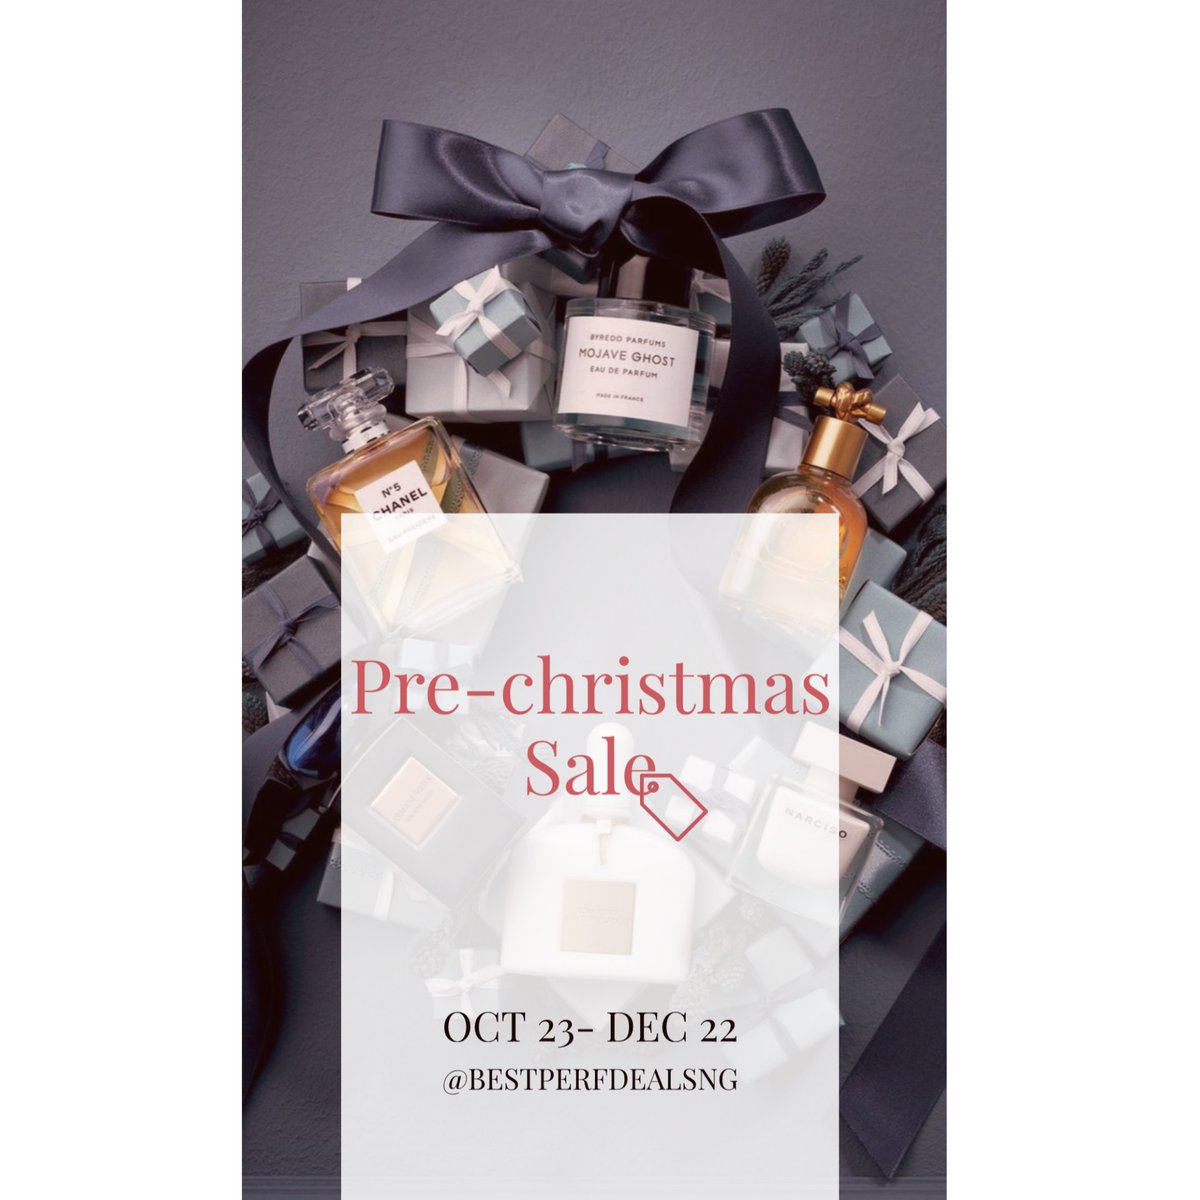 Pre- Christmas Sale begins tomorrow.Jump on our biggest price slash this year from tomorrow till Dec 22.Follow this thread/our IG stories and highlights so you don't miss a thing!Turn on post notifications.Pls RT to a fraghead near you. #bestperfdealsng